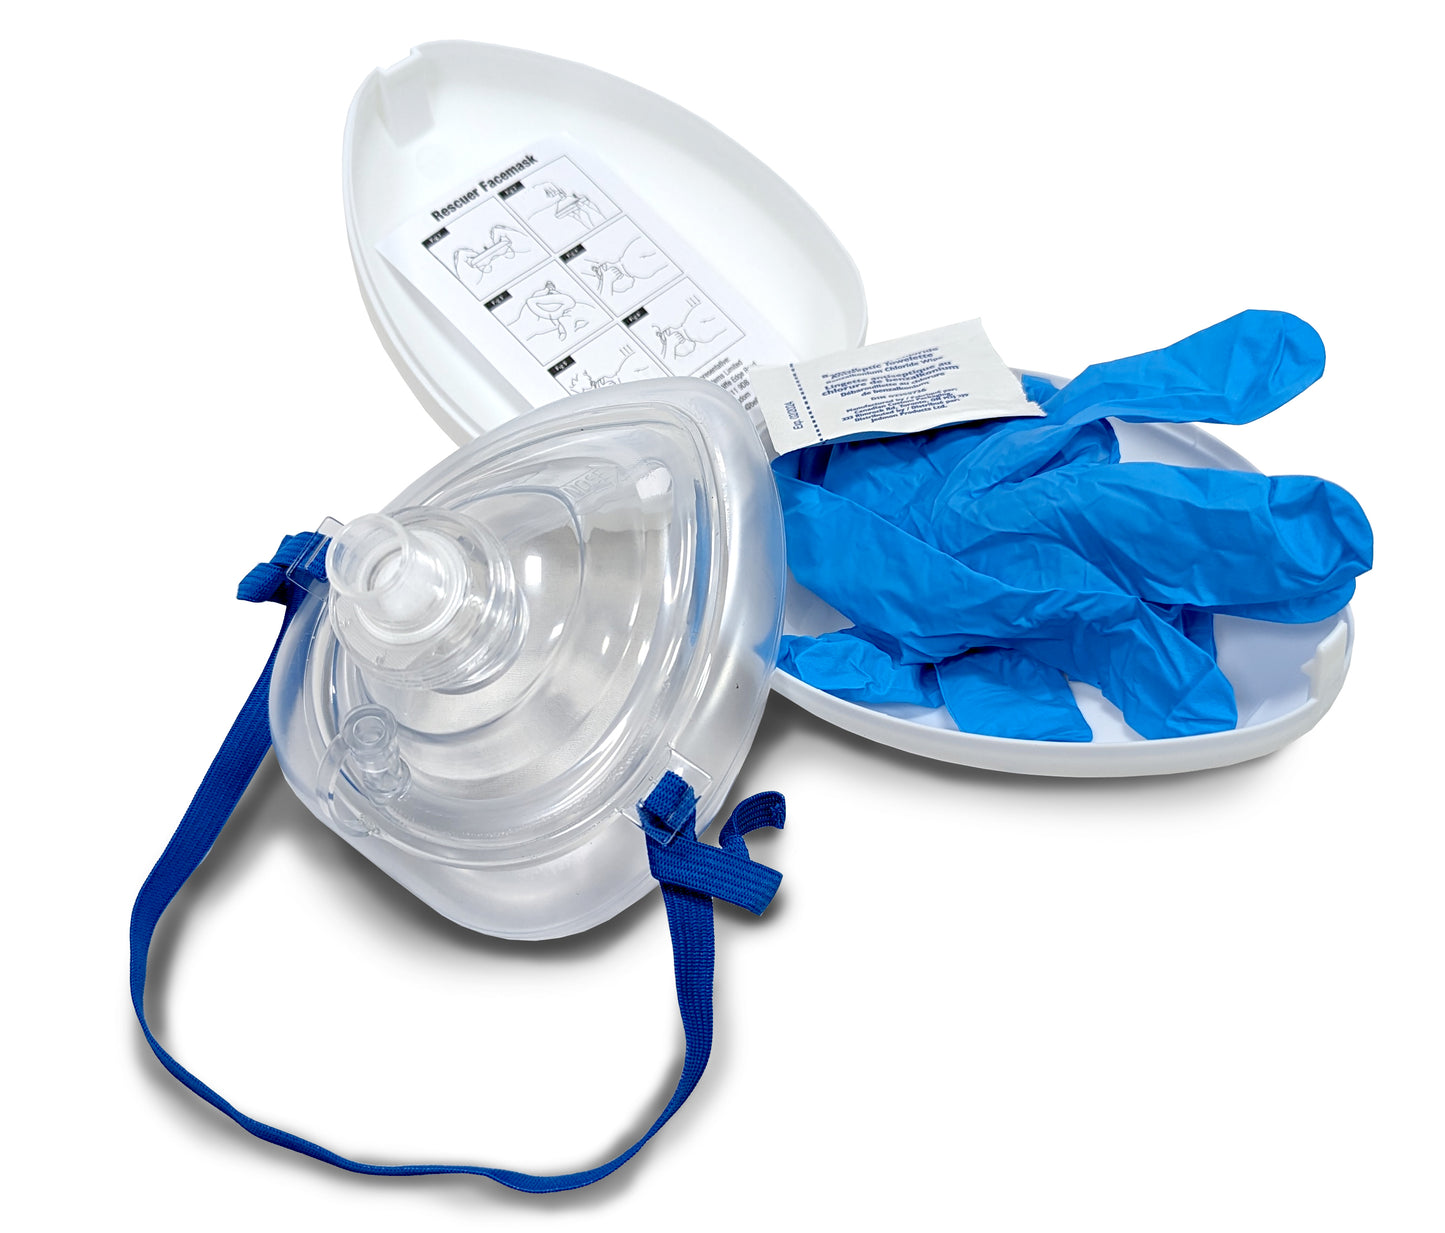 Rescuer® CPR mask with one way valve and clamshell case